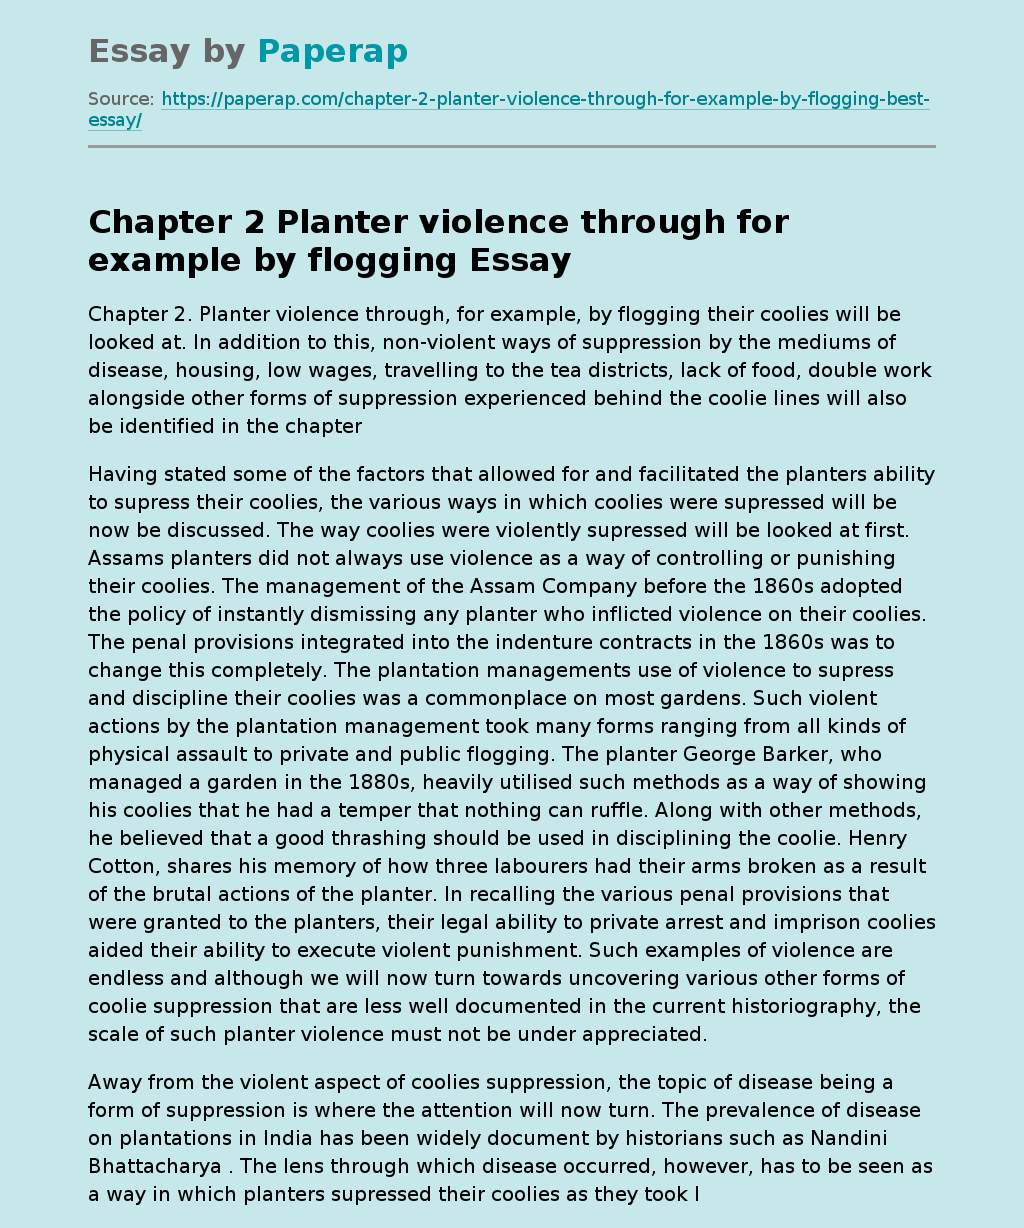 Chapter 2 Planter violence through for example by flogging